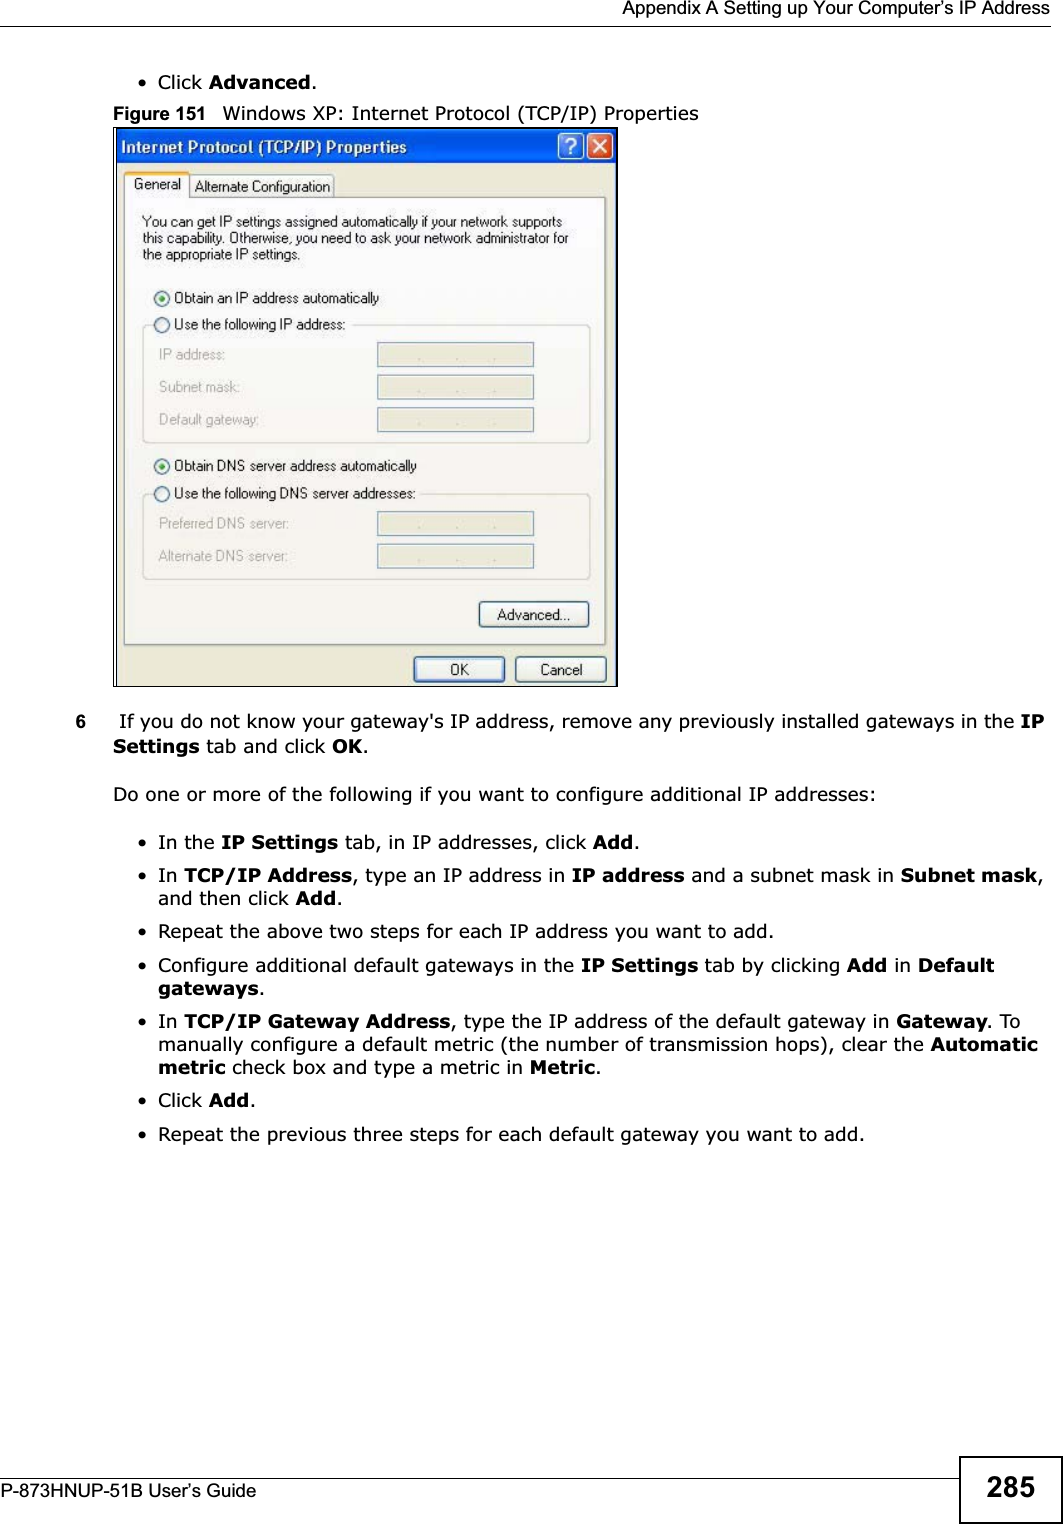  Appendix A Setting up Your Computer’s IP AddressP-873HNUP-51B User’s Guide 285• Click Advanced.Figure 151   Windows XP: Internet Protocol (TCP/IP) Properties6 If you do not know your gateway&apos;s IP address, remove any previously installed gateways in the IPSettings tab and click OK.Do one or more of the following if you want to configure additional IP addresses:•In the IP Settings tab, in IP addresses, click Add.•In TCP/IP Address, type an IP address in IP address and a subnet mask in Subnet mask,and then click Add.• Repeat the above two steps for each IP address you want to add.• Configure additional default gateways in the IP Settings tab by clicking Add in Default gateways.•In TCP/IP Gateway Address, type the IP address of the default gateway in Gateway. To manually configure a default metric (the number of transmission hops), clear the Automatic metric check box and type a metric in Metric.• Click Add.• Repeat the previous three steps for each default gateway you want to add.